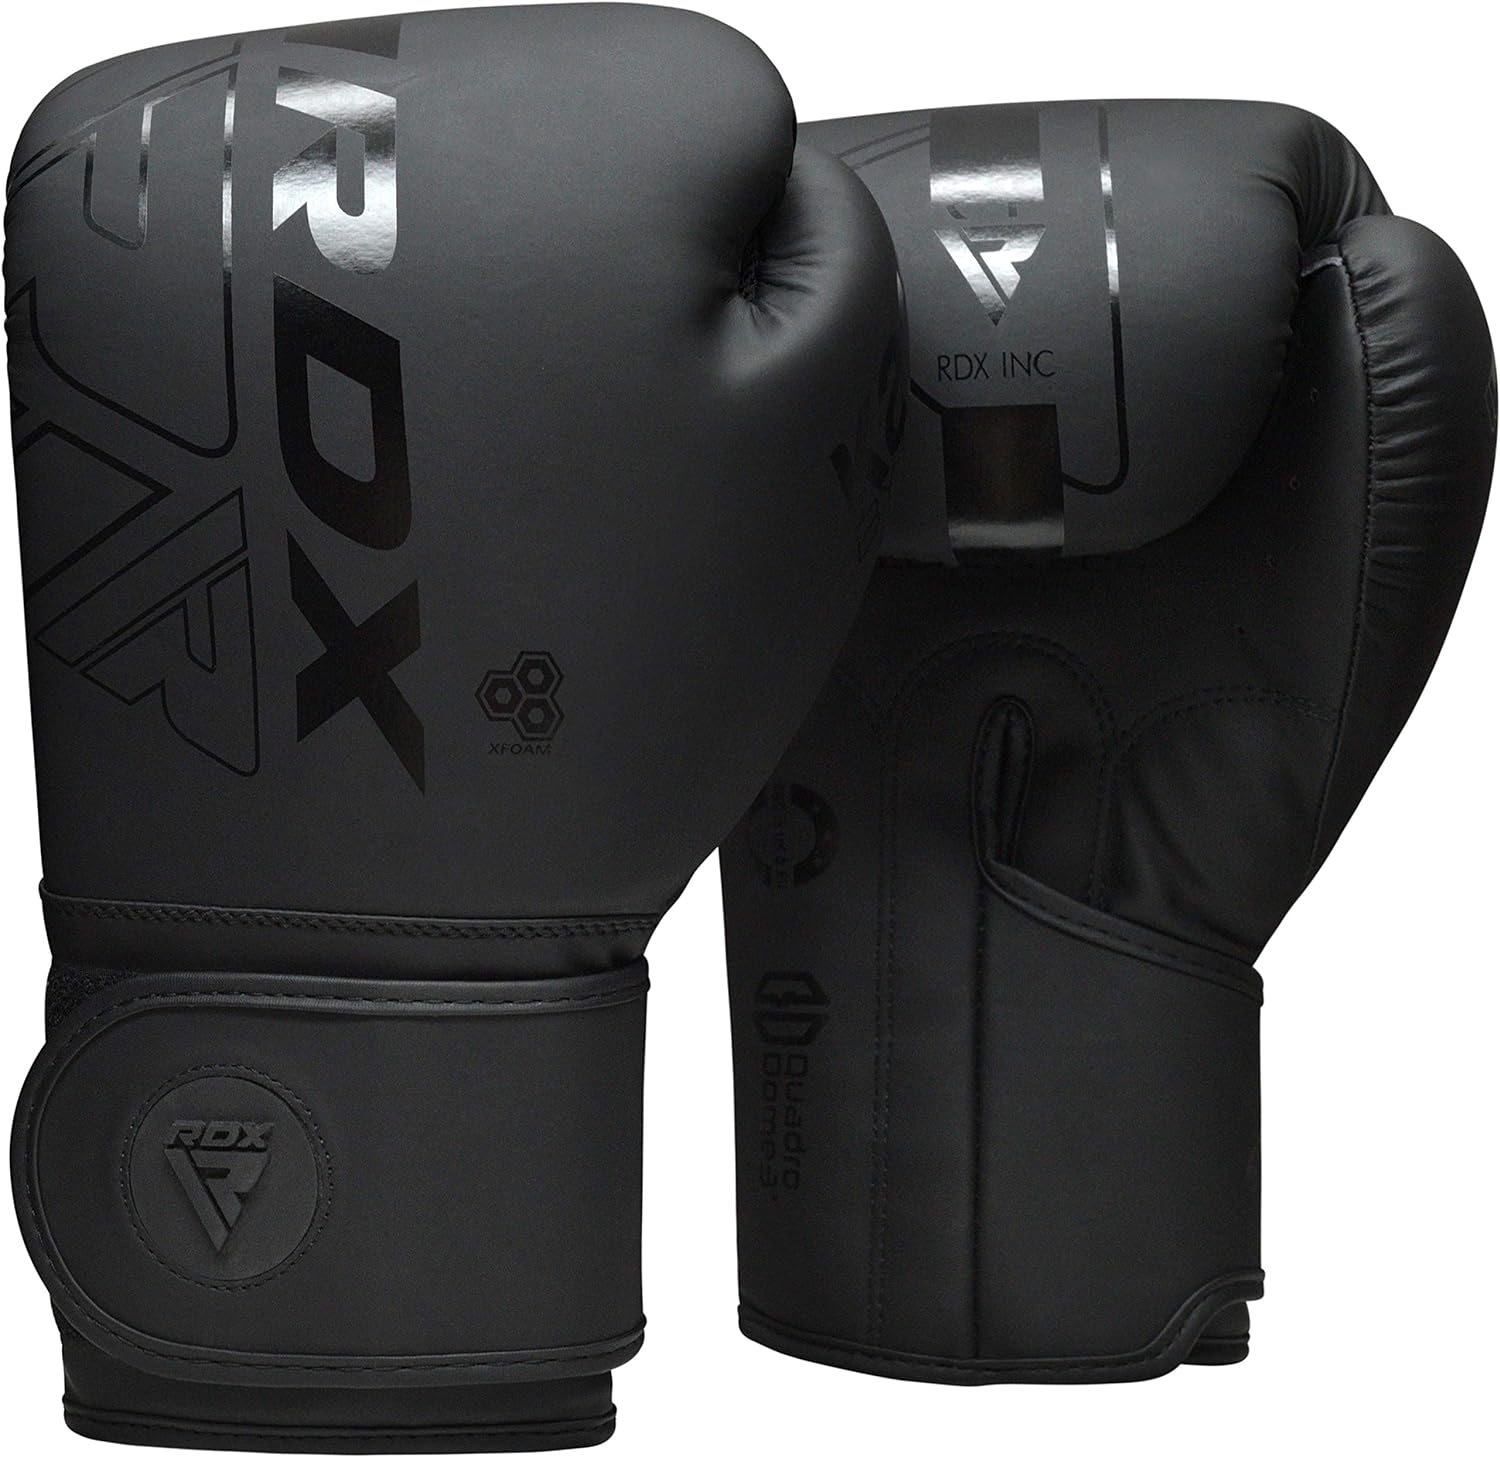 Eclipse Martial Art Supplies Training Gloves BLACK / 10 OZ RDX Boxing Gloves Men Women, Pro Training Sparring, Maya Hide Leather Muay Thai MMA Kickboxing, Adult Heavy Punching Bag Gloves Mitts Focus Pad Workout, Ventilated Palm